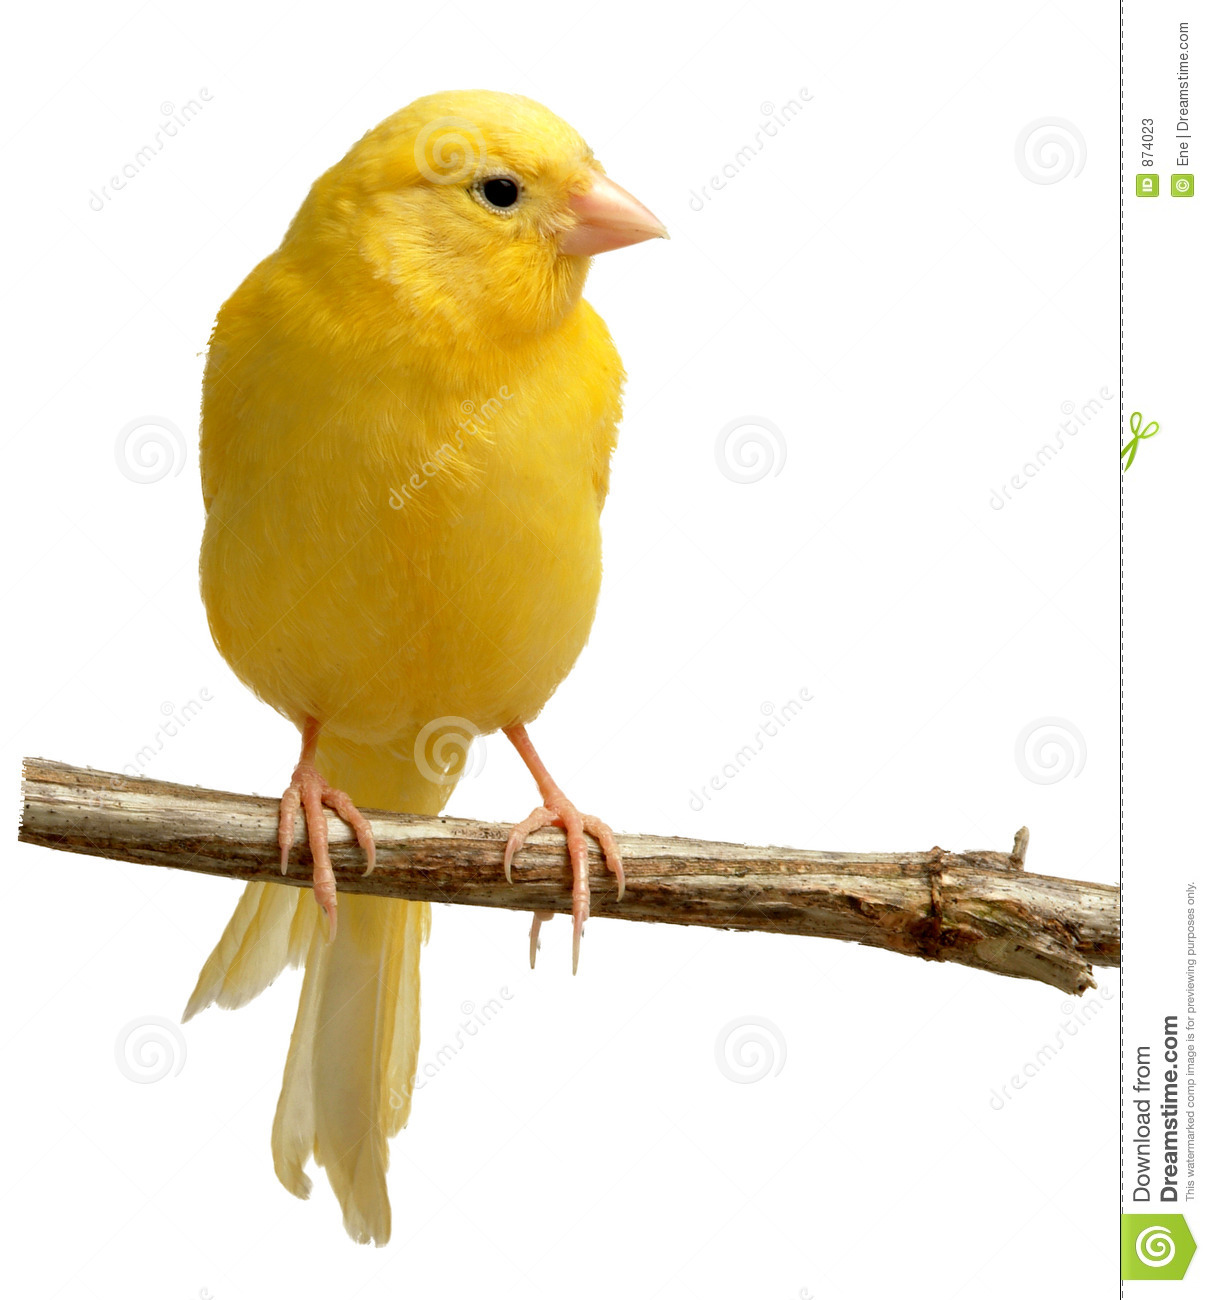 Nice wallpapers Canary 1210x1300px